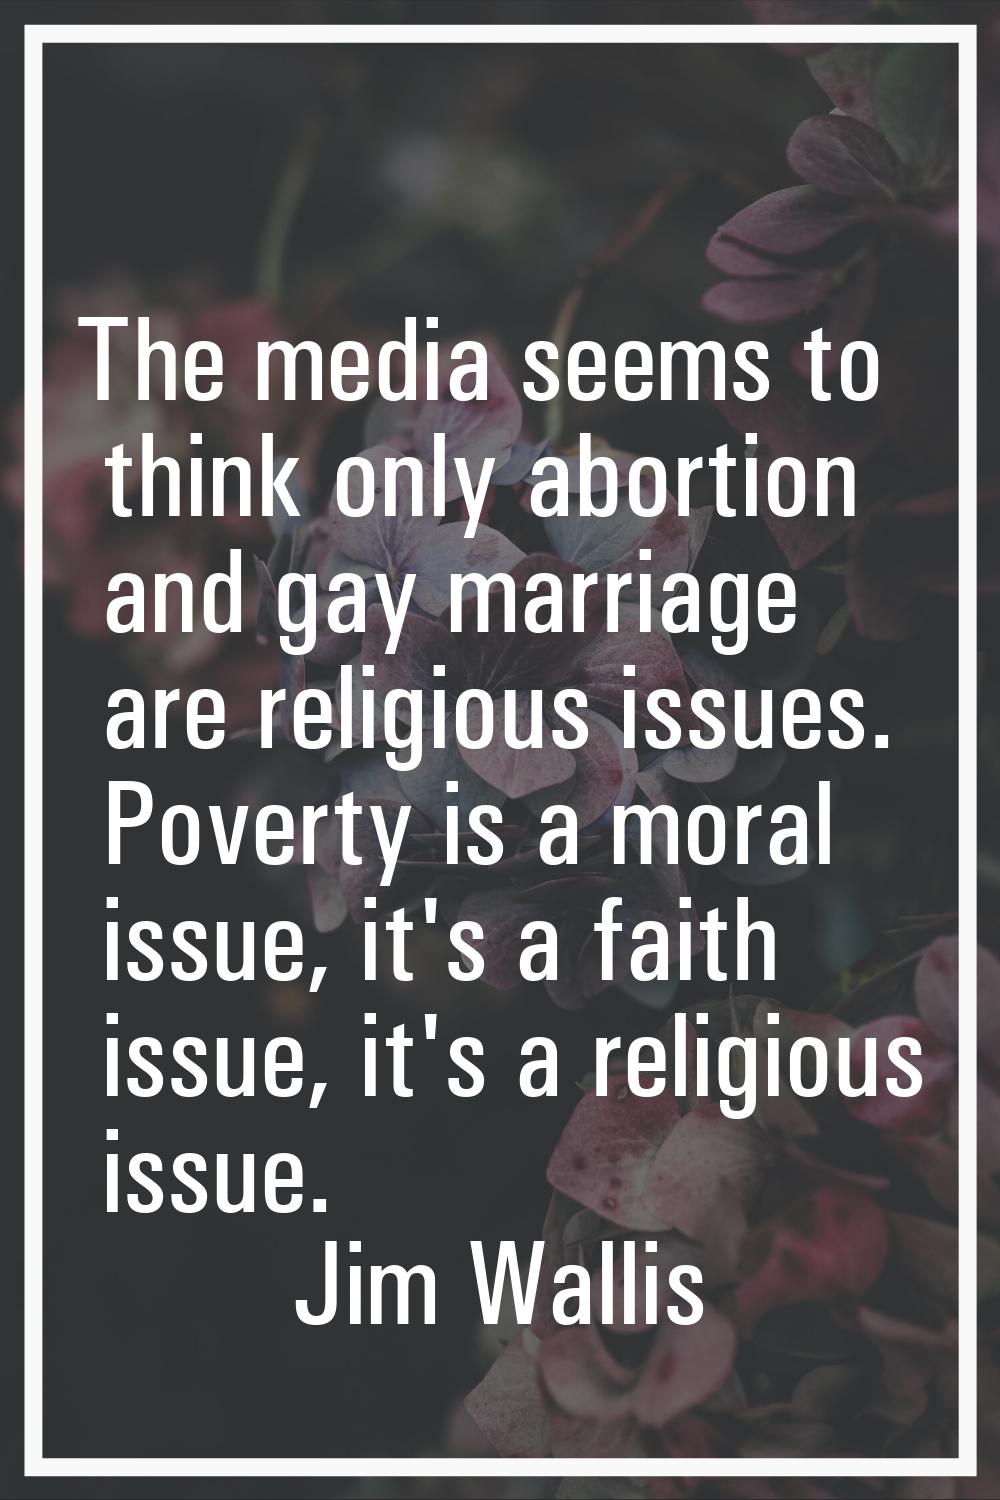 The media seems to think only abortion and gay marriage are religious issues. Poverty is a moral is